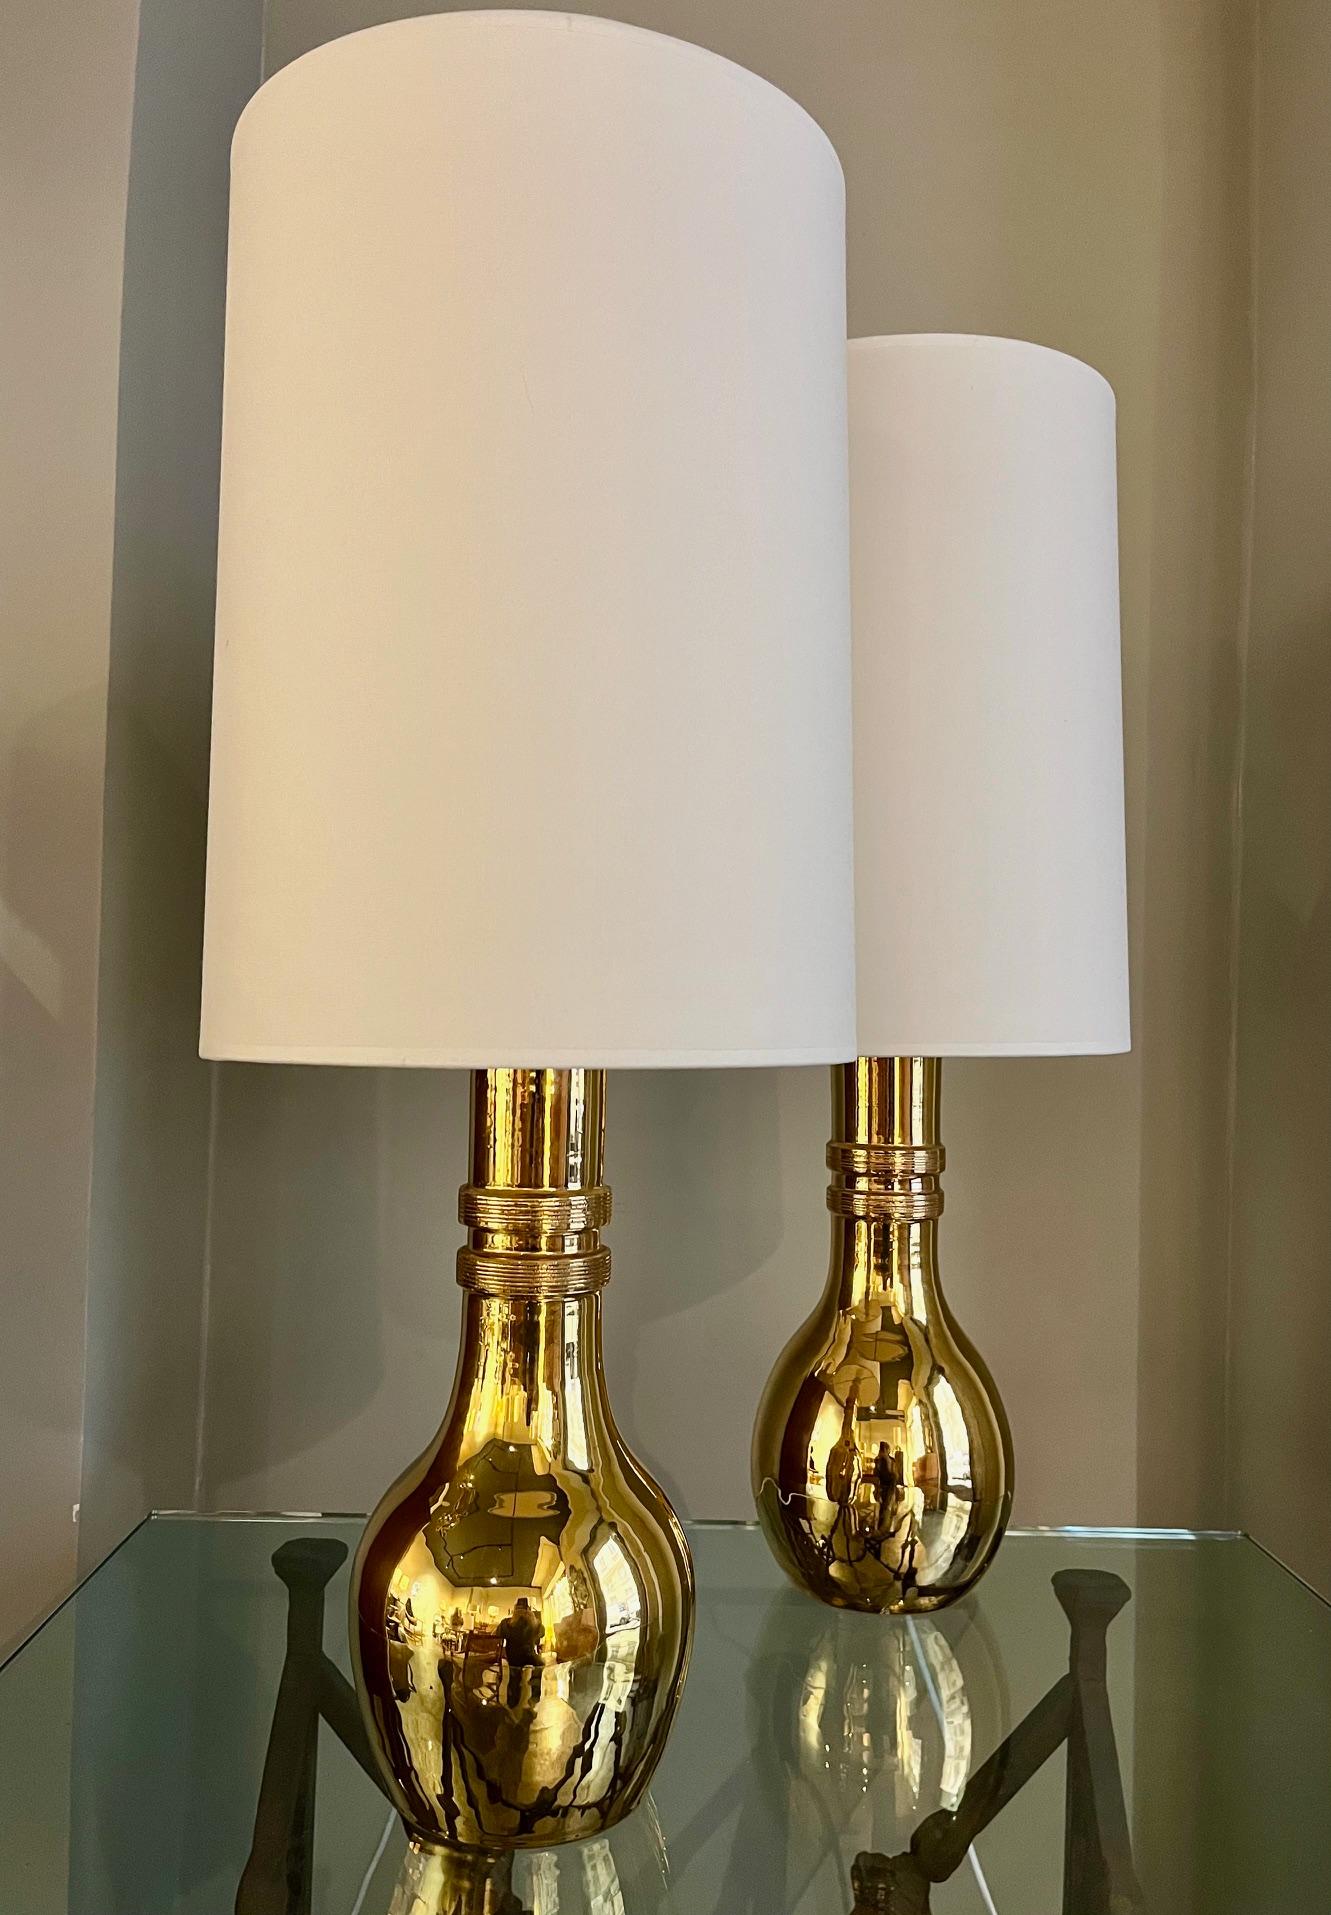 Pair of  ceramic lamps by Bitossi

Pair of gilt ceramic lamps.
By Bitossi (manufacturer) for Miranda ( Swedish retailer ) 
Italy, 1960

Dimensions :
Height ( total - with lampshade ) : 75 cm ( 29.5 inches )
Height ( ceramic) 36 cm ( 14.2 inches